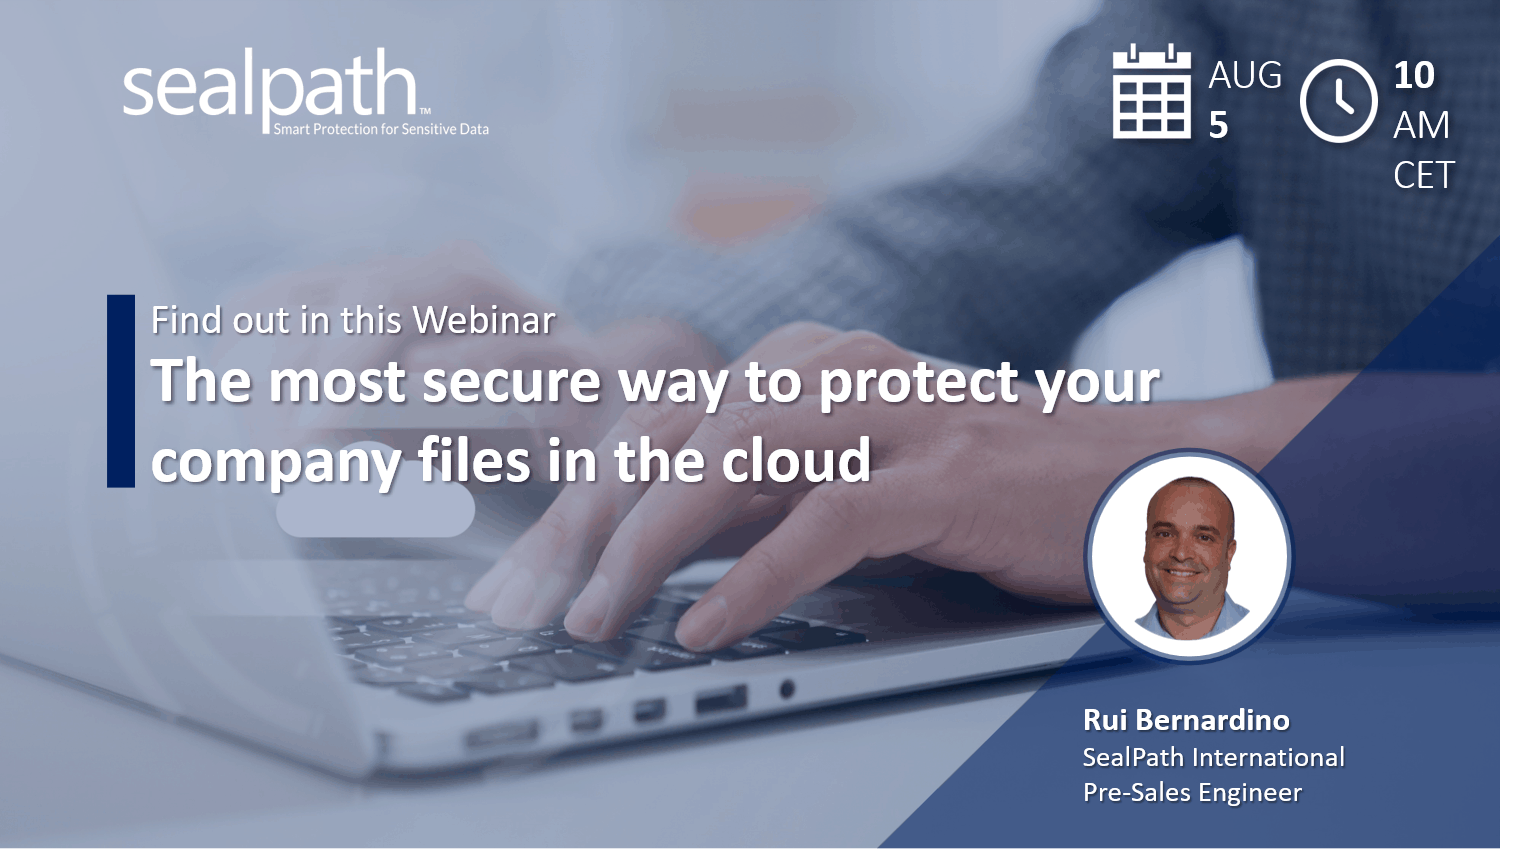 The most secure way to protect your company files in the cloud